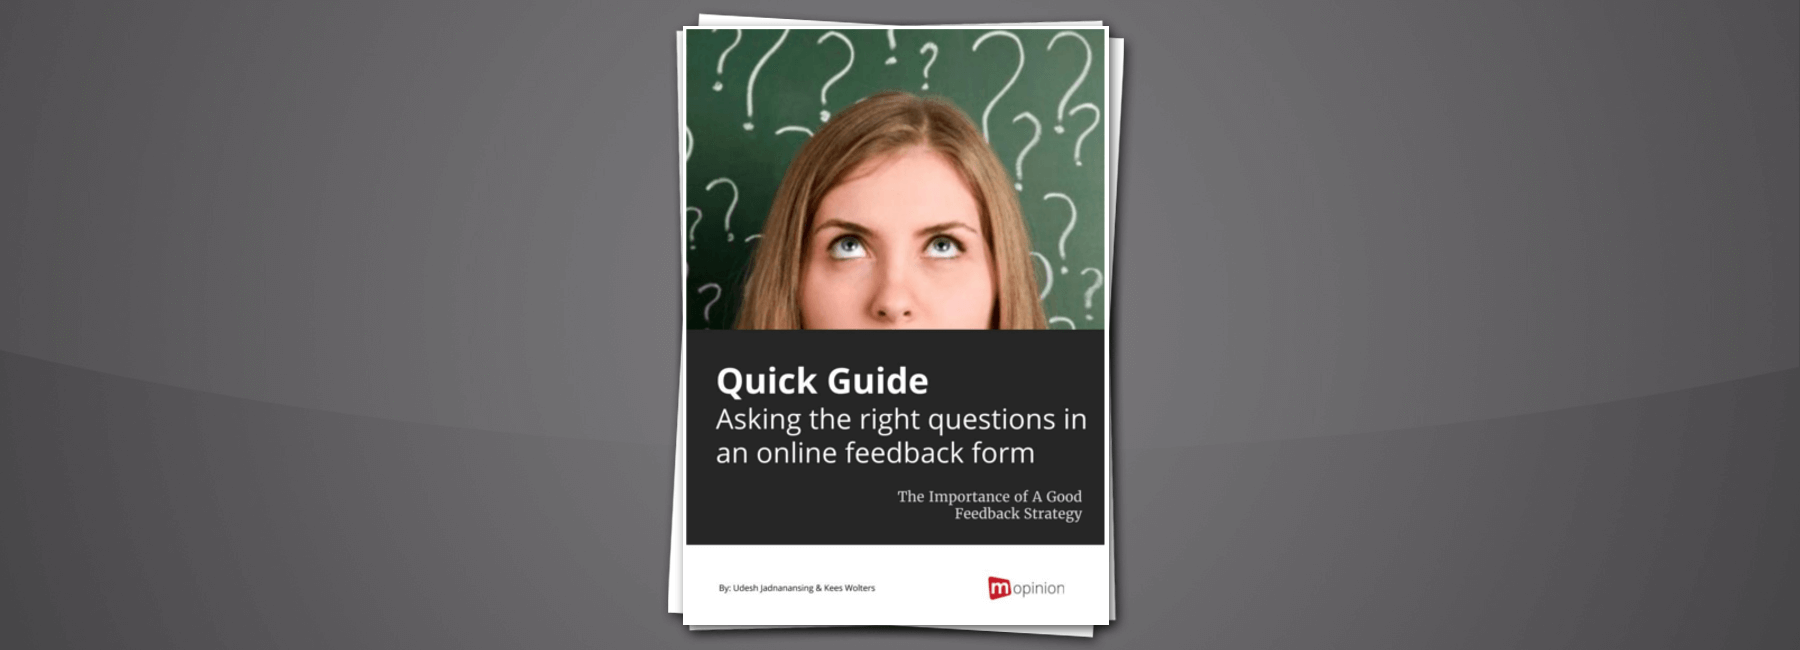 Quick Guide: Ask the Right Questions in Feedback Forms